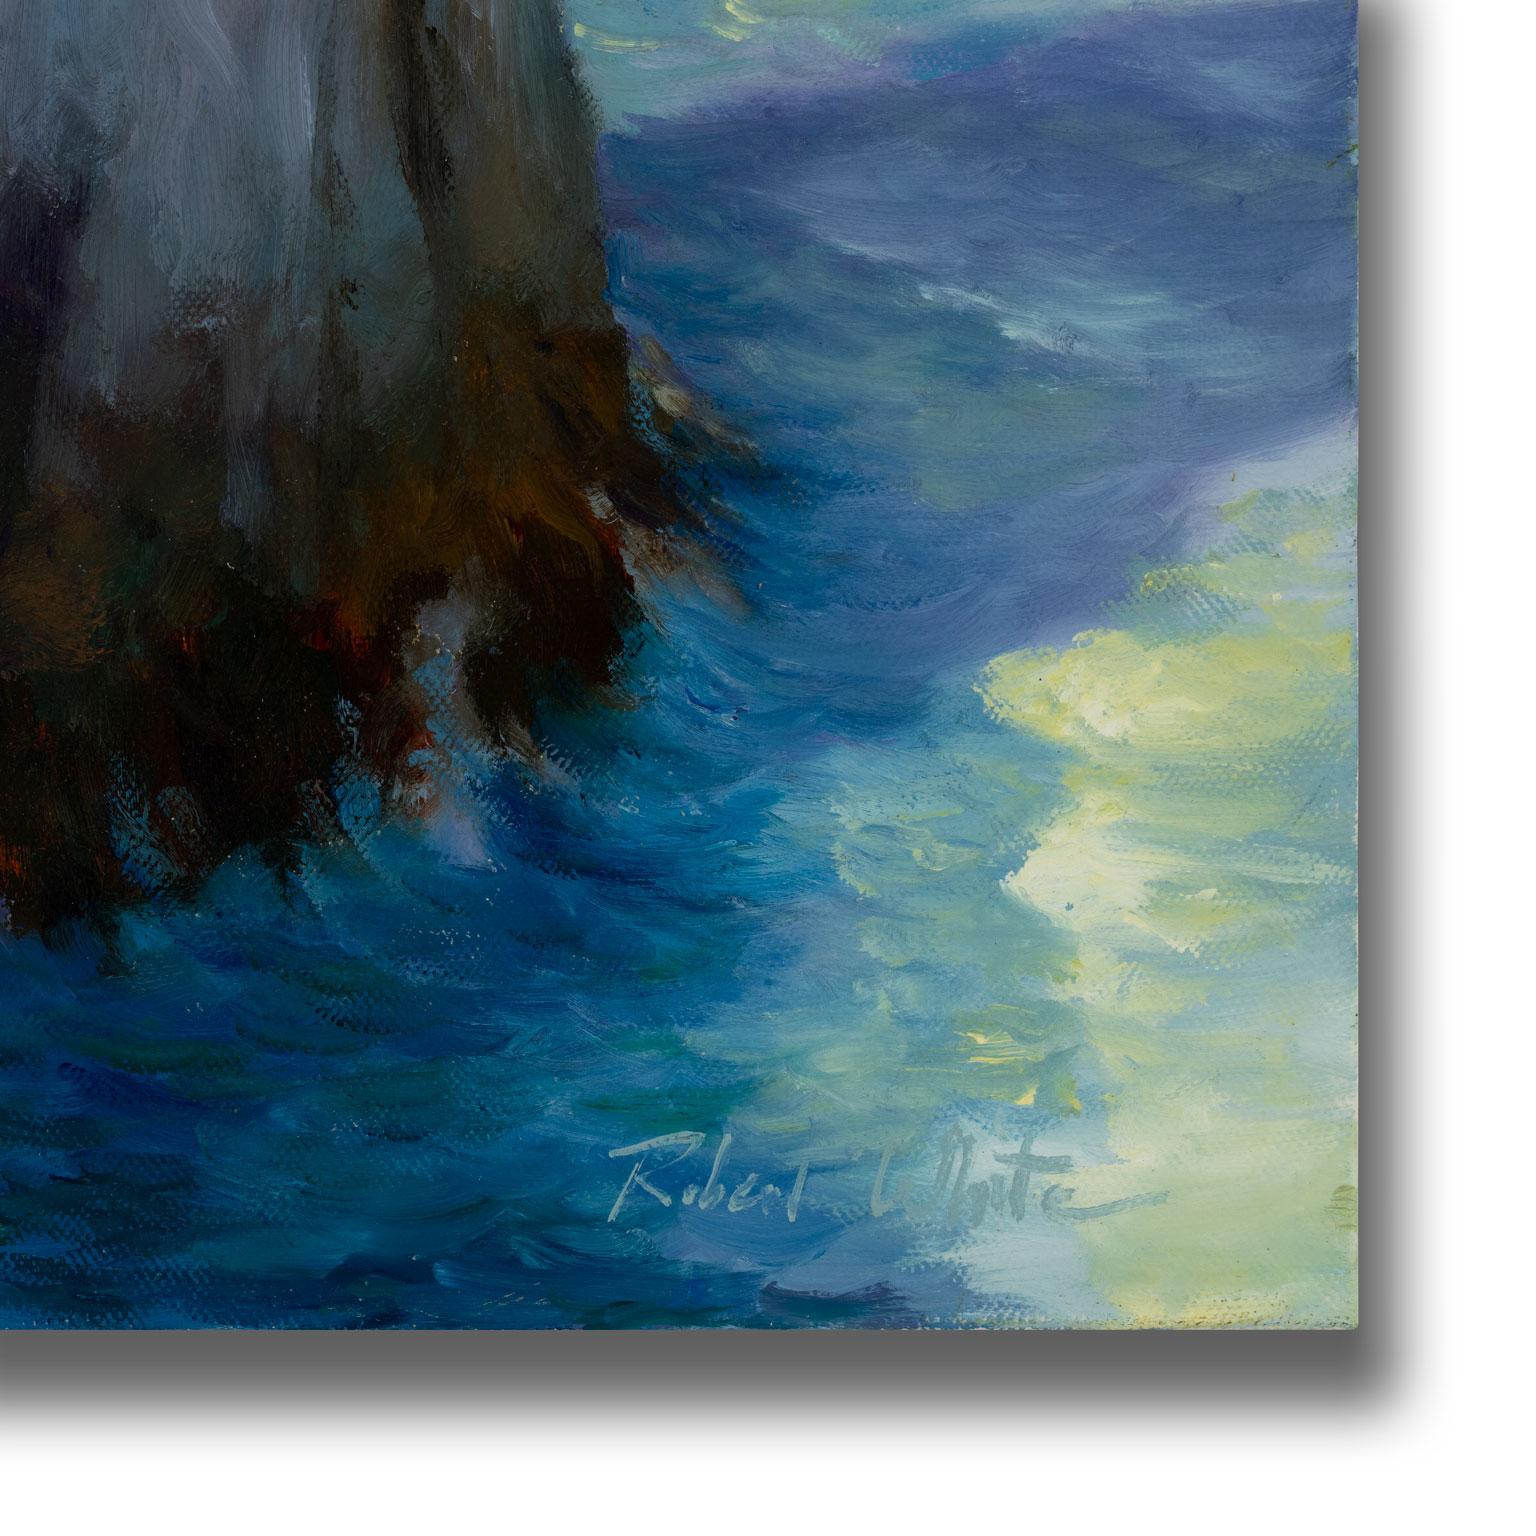 Untitled [Seascape], an original oil on canvas by Robert K. White, is a piece for the true collector. White’s careful attention to detail and vivid use of blues, blue-greens, and browns project from the painting, immediately capturing the viewer's